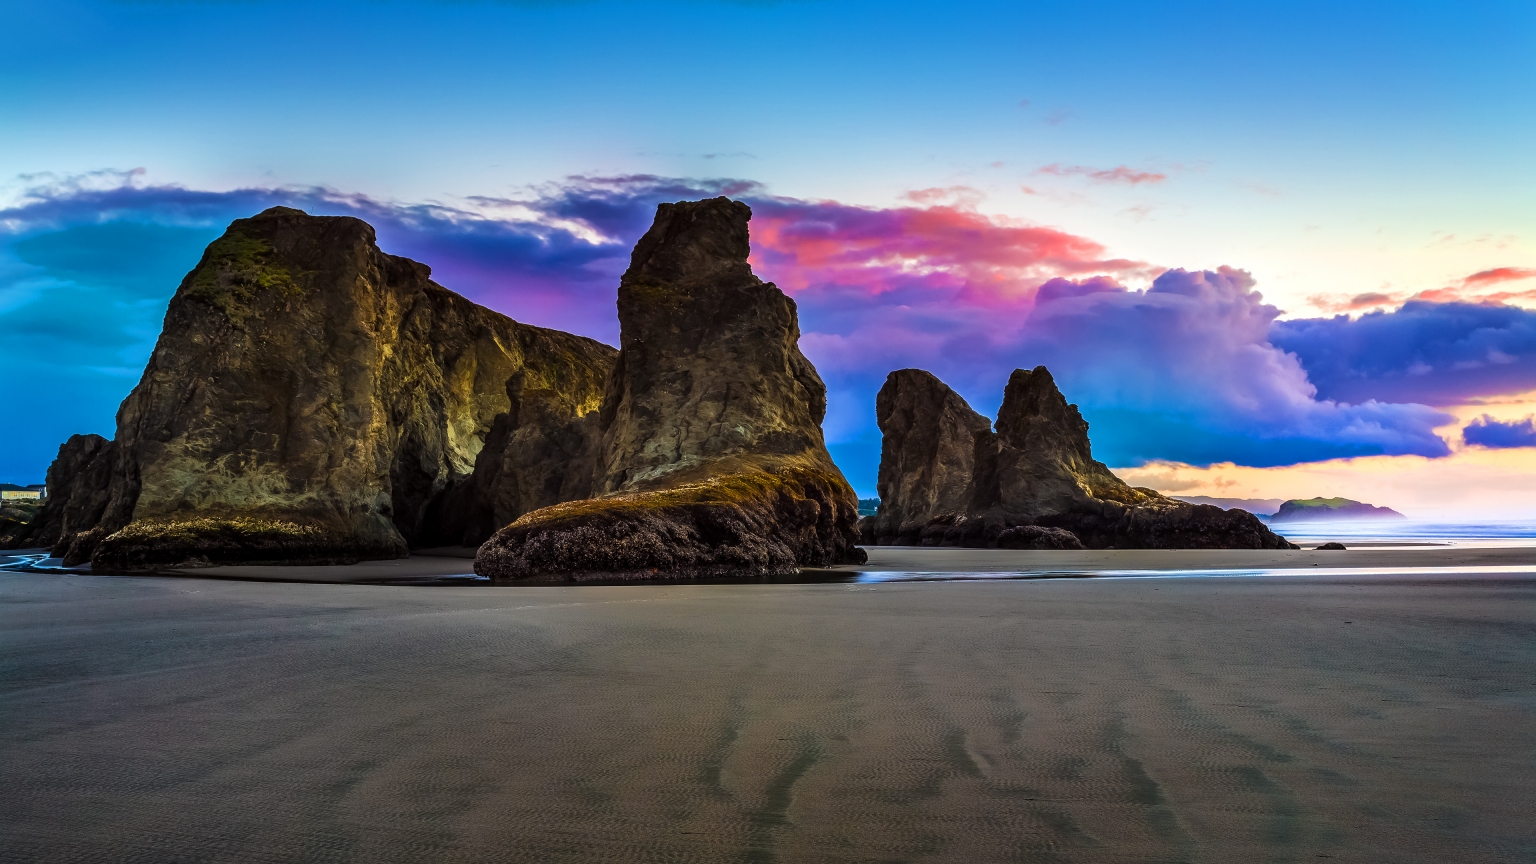 Bandon By the Sea for 1536 x 864 HDTV resolution